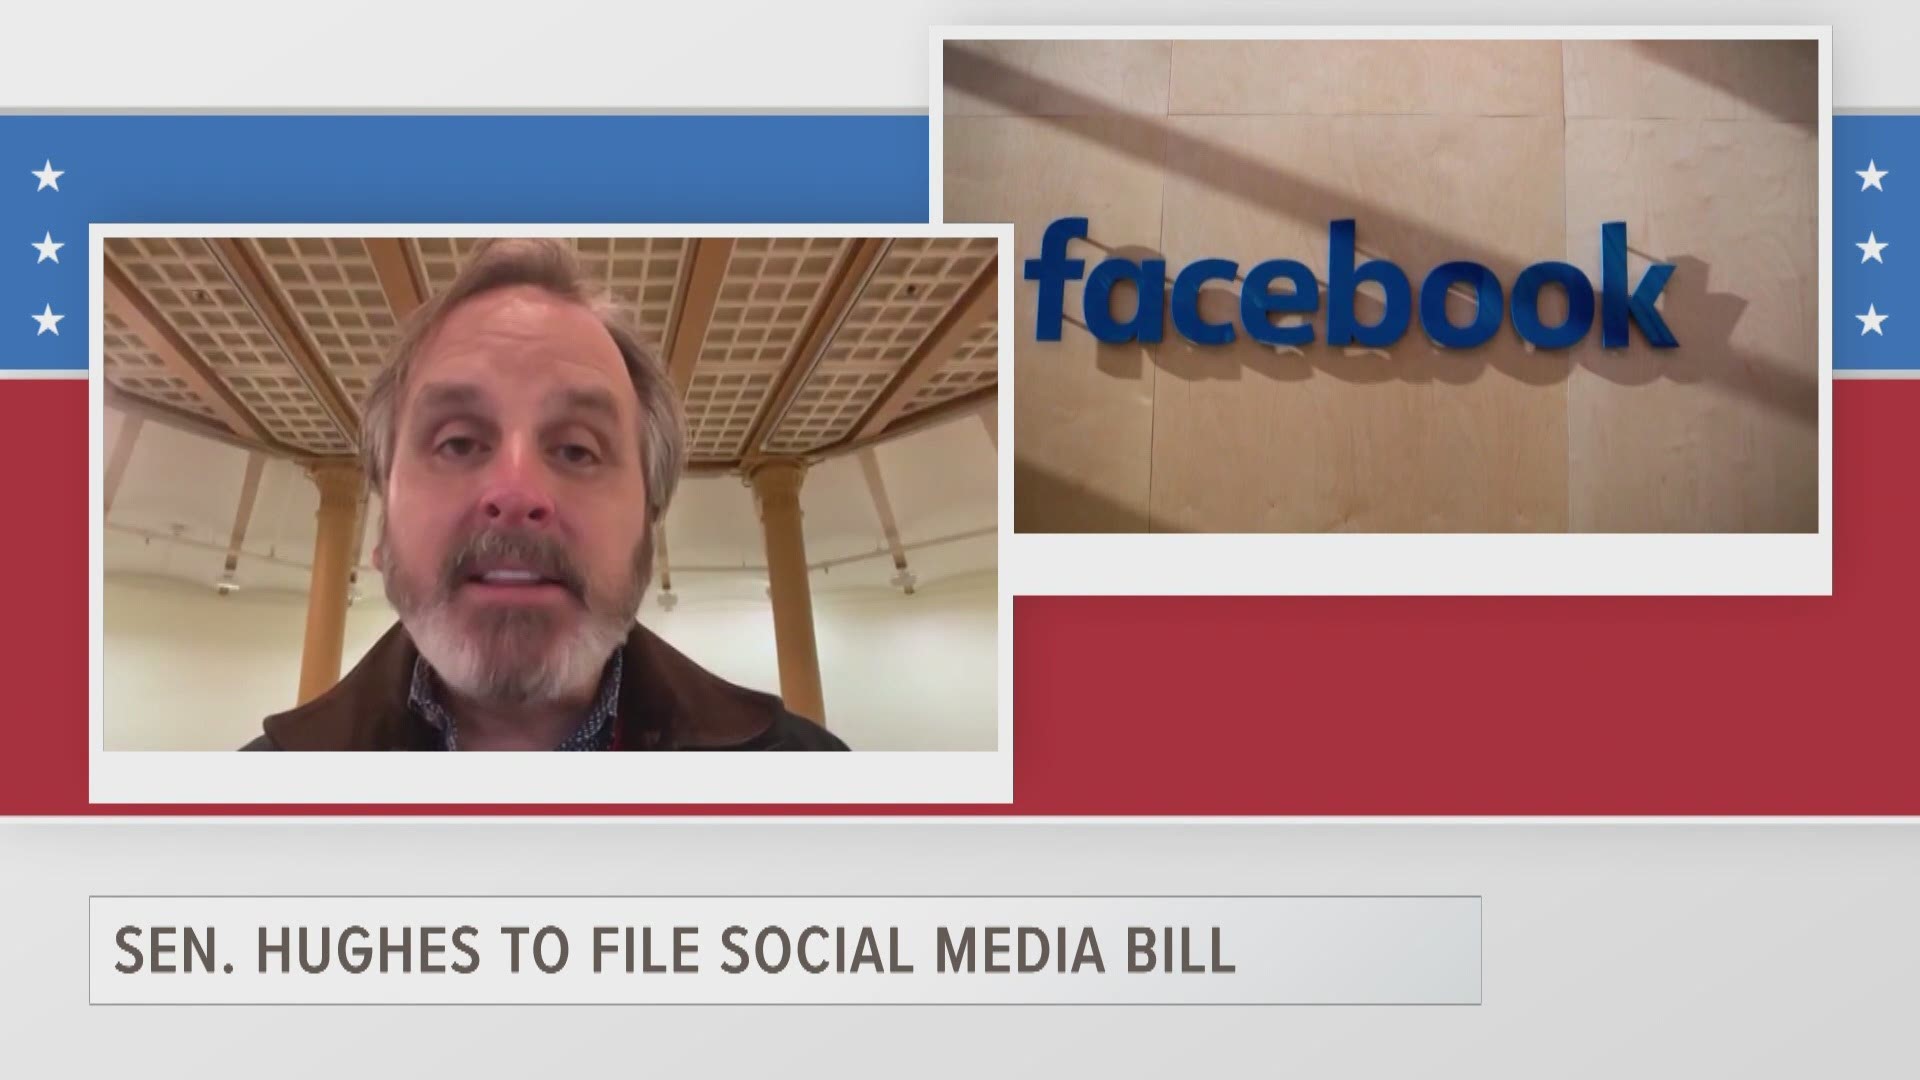 Part three of a conversation with State Sen. Bryan Hughes (R-Mineola) in which he discusses a bill he plans to file to regulate social media companies